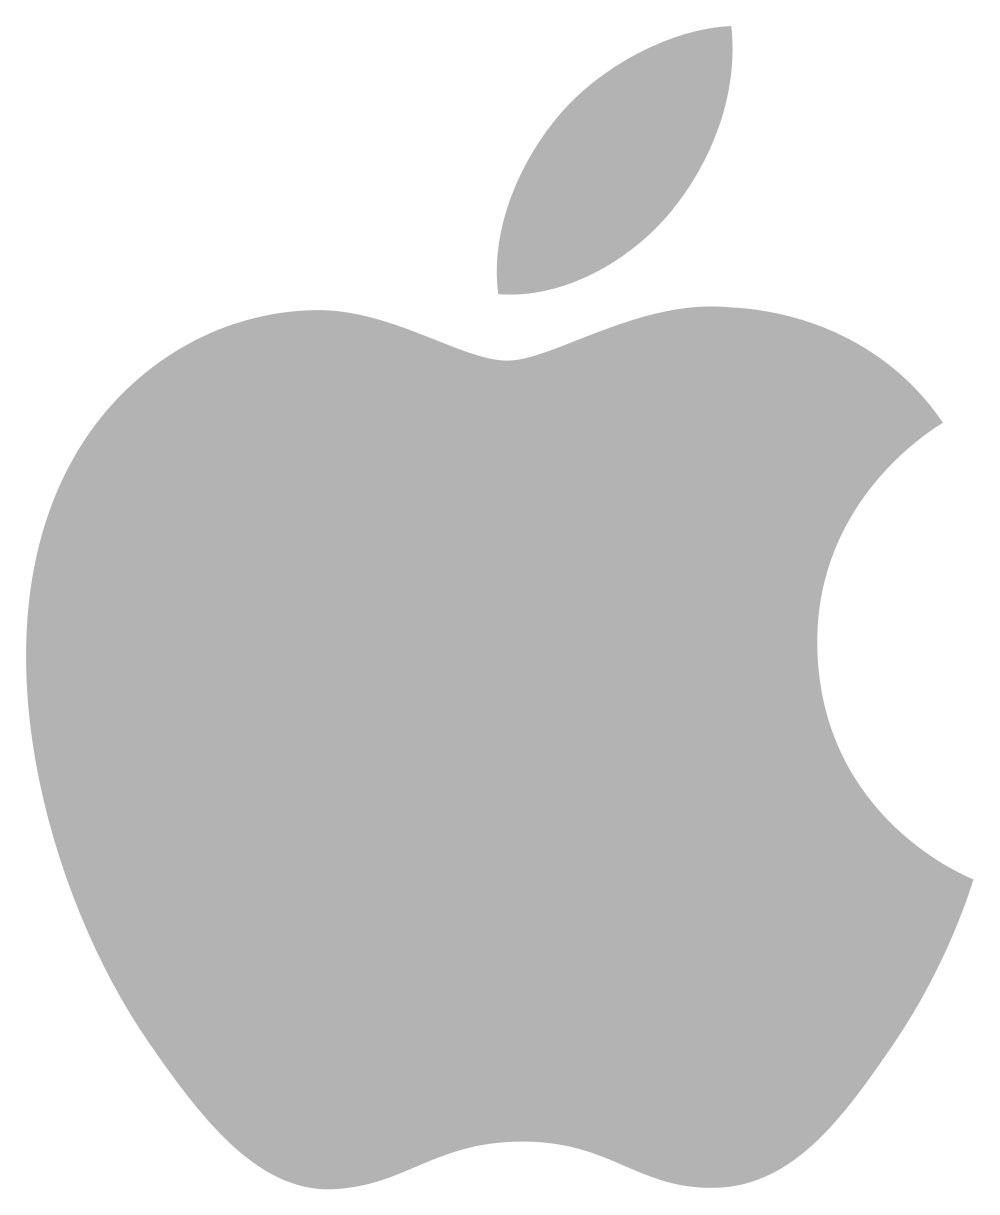 Apple Inc. Logo - Graphic freeuse download apple logo - RR collections